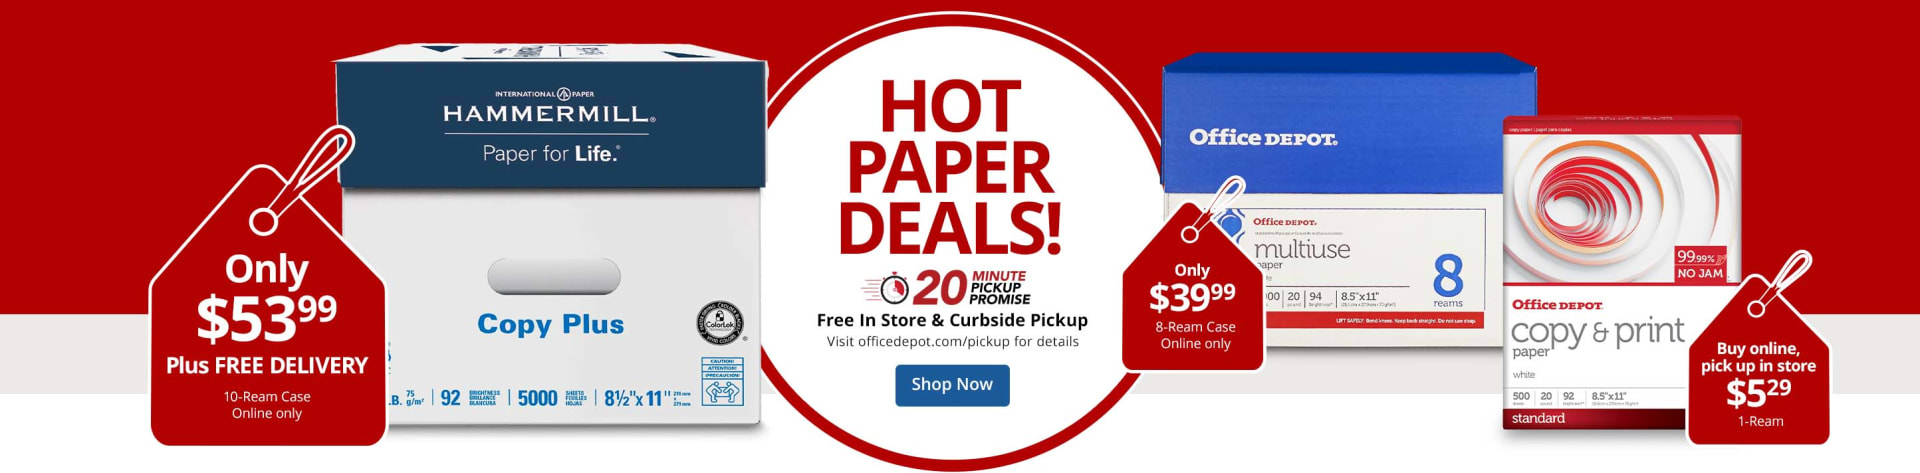 Today's Paper Deals! Limited Time Only!